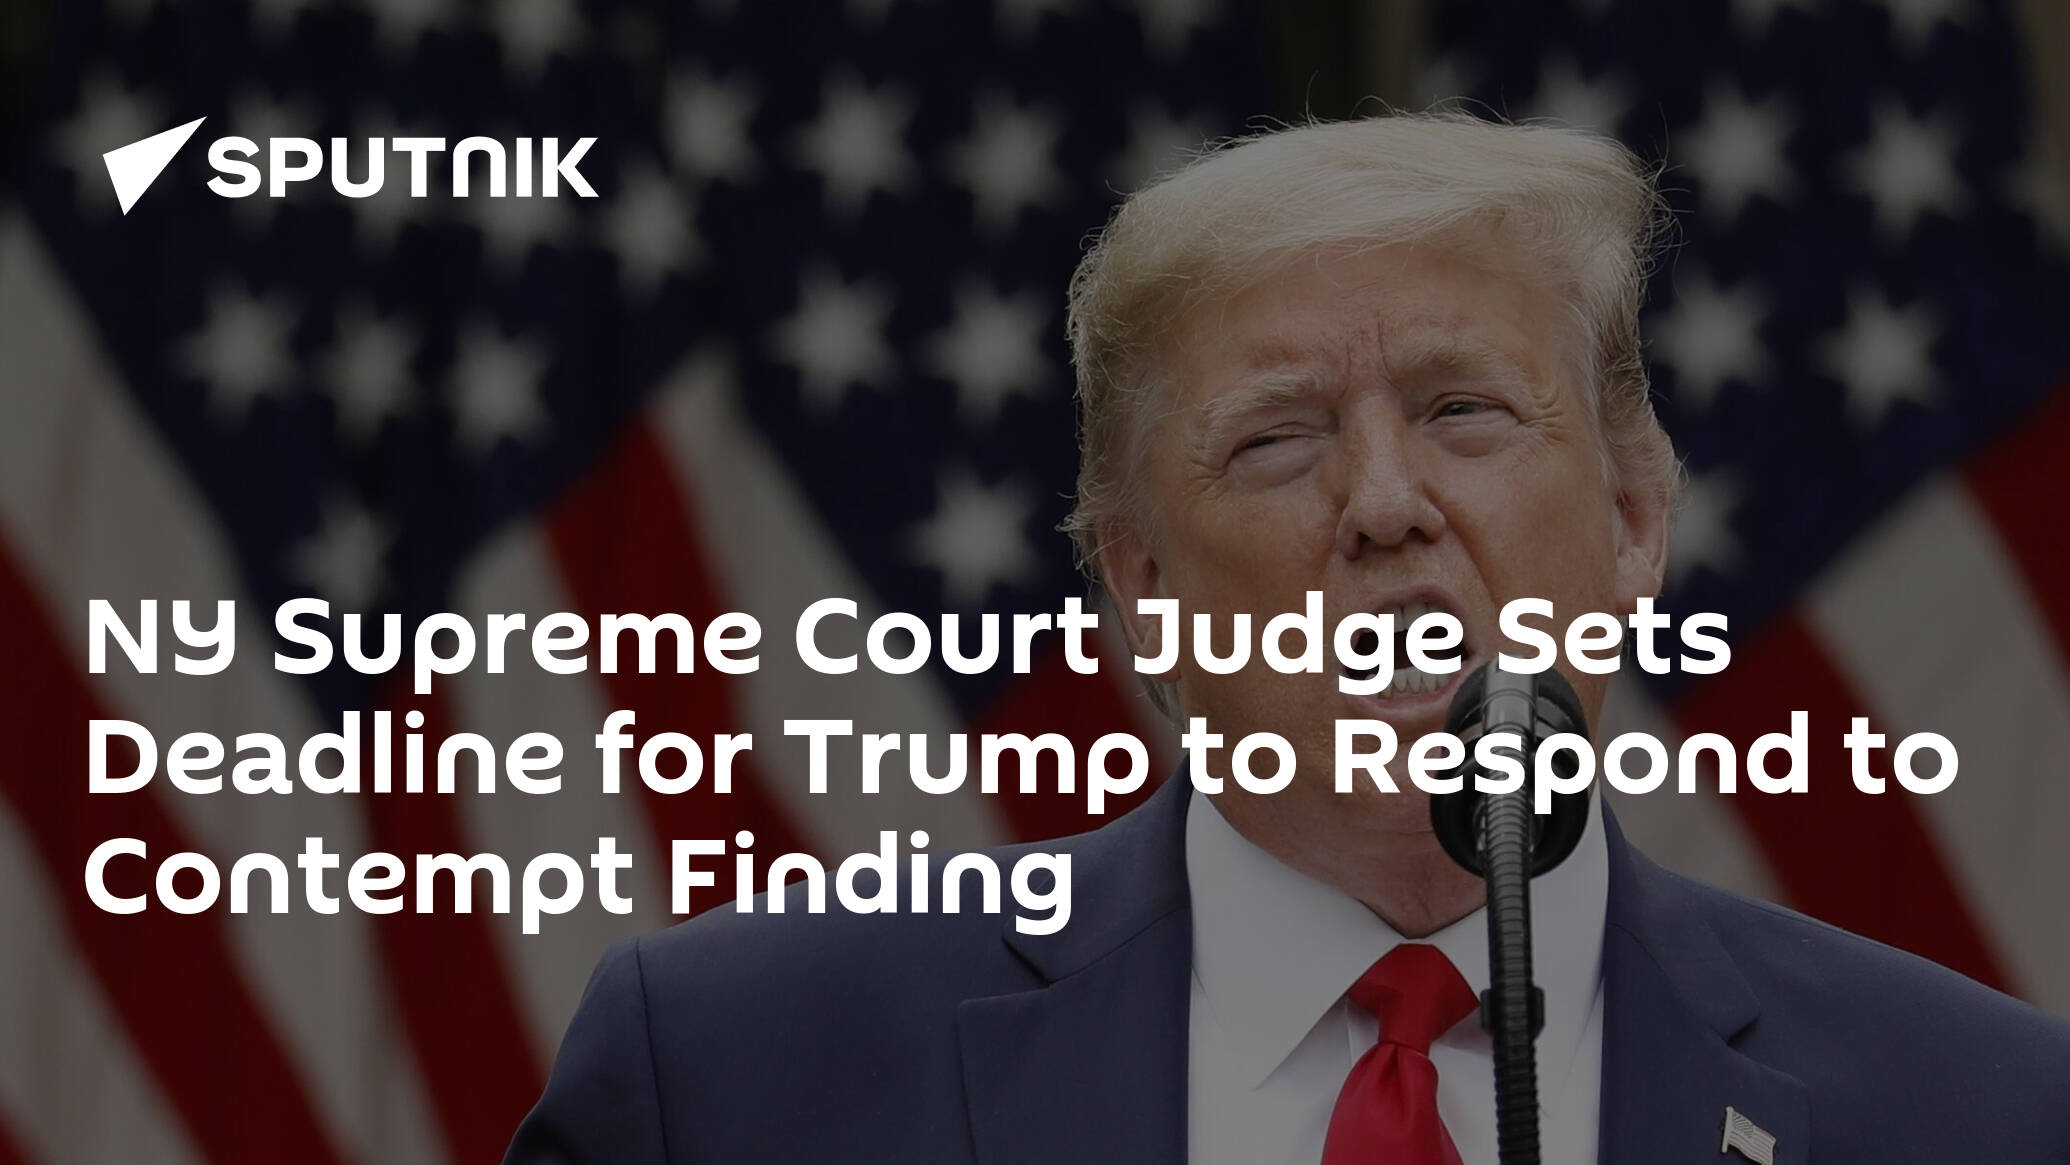 NY Supreme Court Judge Sets Deadline for Trump to Respond to Contempt Finding